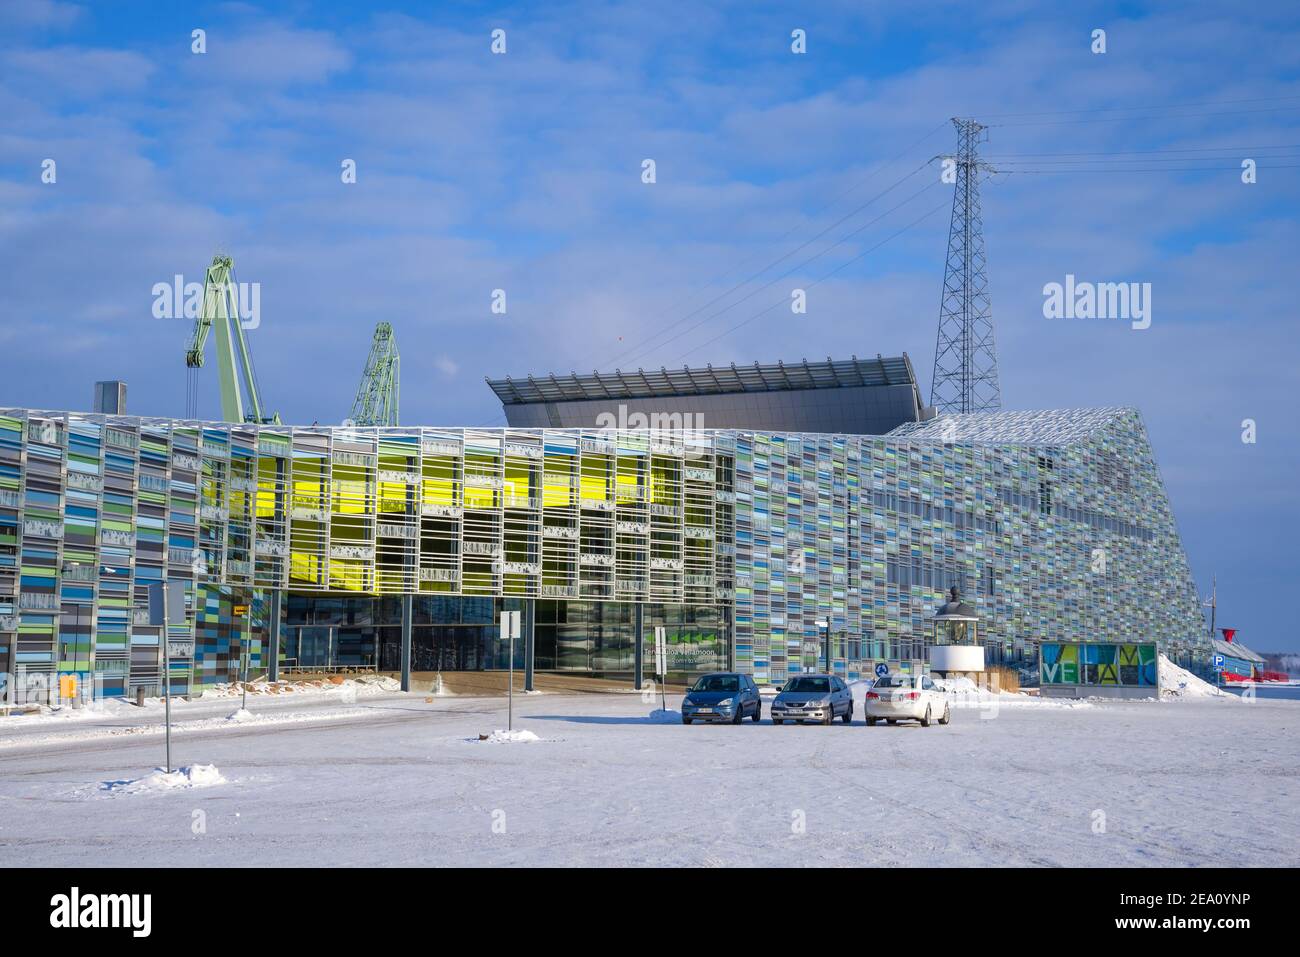 KOTKA, FINLAND - FEBRUARY 25, 2018: At the entrance to the maritime center Vellamo in February afternoon Stock Photo